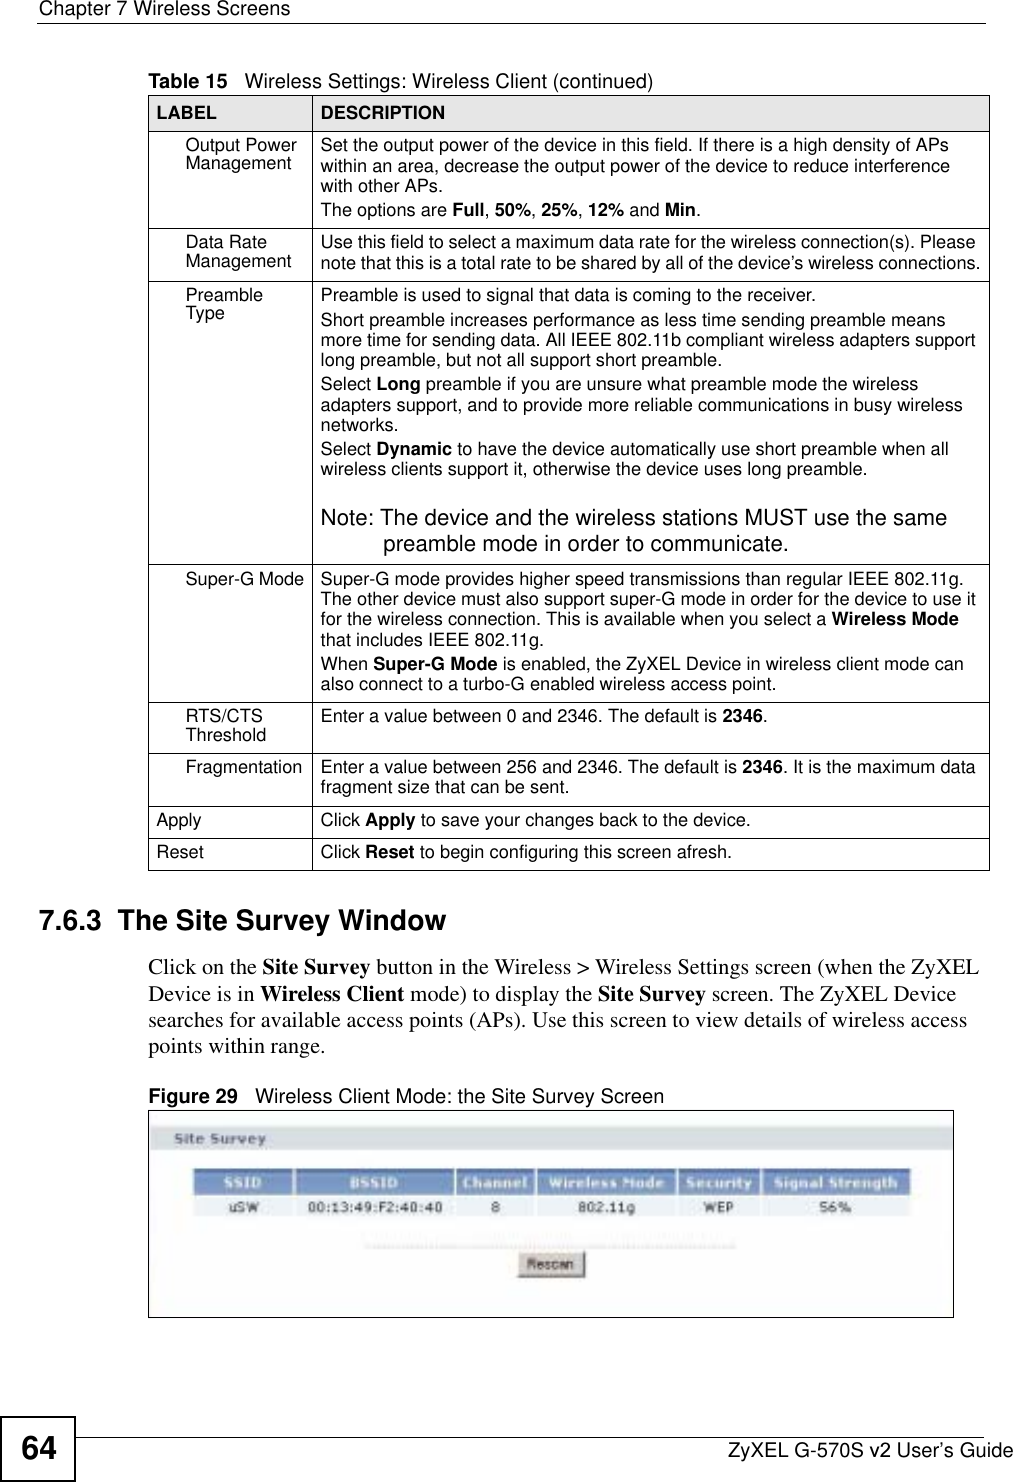 Chapter 7 Wireless ScreensZyXEL G-570S v2 User’s Guide647.6.3  The Site Survey WindowClick on the Site Survey button in the Wireless &gt; Wireless Settings screen (when the ZyXEL Device is in Wireless Client mode) to display the Site Survey screen. The ZyXEL Device searches for available access points (APs). Use this screen to view details of wireless access points within range.Figure 29   Wireless Client Mode: the Site Survey ScreenOutput Power Management Set the output power of the device in this field. If there is a high density of APs within an area, decrease the output power of the device to reduce interference with other APs.The options are Full,50%,25%,12% and Min.Data Rate Management Use this field to select a maximum data rate for the wireless connection(s). Please note that this is a total rate to be shared by all of the device’s wireless connections.Preamble Type Preamble is used to signal that data is coming to the receiver.  Short preamble increases performance as less time sending preamble means more time for sending data. All IEEE 802.11b compliant wireless adapters support long preamble, but not all support short preamble. Select Long preamble if you are unsure what preamble mode the wireless adapters support, and to provide more reliable communications in busy wireless networks. Select Dynamic to have the device automatically use short preamble when all wireless clients support it, otherwise the device uses long preamble.Note: The device and the wireless stations MUST use the same preamble mode in order to communicate.Super-G Mode Super-G mode provides higher speed transmissions than regular IEEE 802.11g. The other device must also support super-G mode in order for the device to use it for the wireless connection. This is available when you select a Wireless Modethat includes IEEE 802.11g.When Super-G Mode is enabled, the ZyXEL Device in wireless client mode can also connect to a turbo-G enabled wireless access point.RTS/CTS Threshold Enter a value between 0 and 2346. The default is 2346.Fragmentation  Enter a value between 256 and 2346. The default is 2346. It is the maximum data fragment size that can be sent.Apply Click Apply to save your changes back to the device.Reset Click Reset to begin configuring this screen afresh.Table 15   Wireless Settings: Wireless Client (continued)LABEL DESCRIPTION